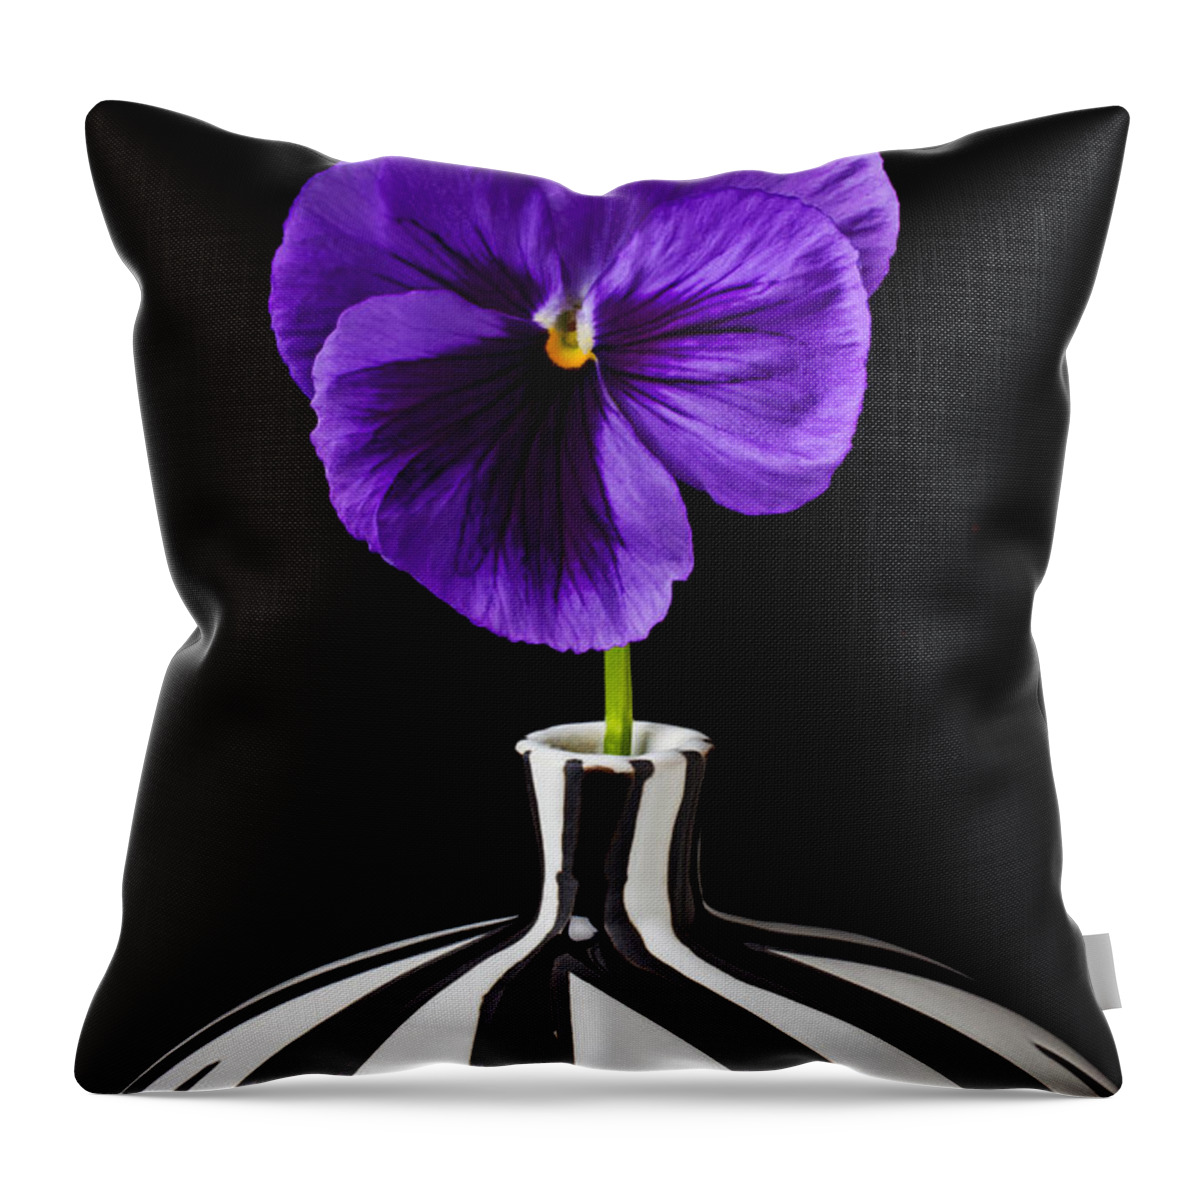 Purple Throw Pillow featuring the photograph Purple Pansy by Garry Gay